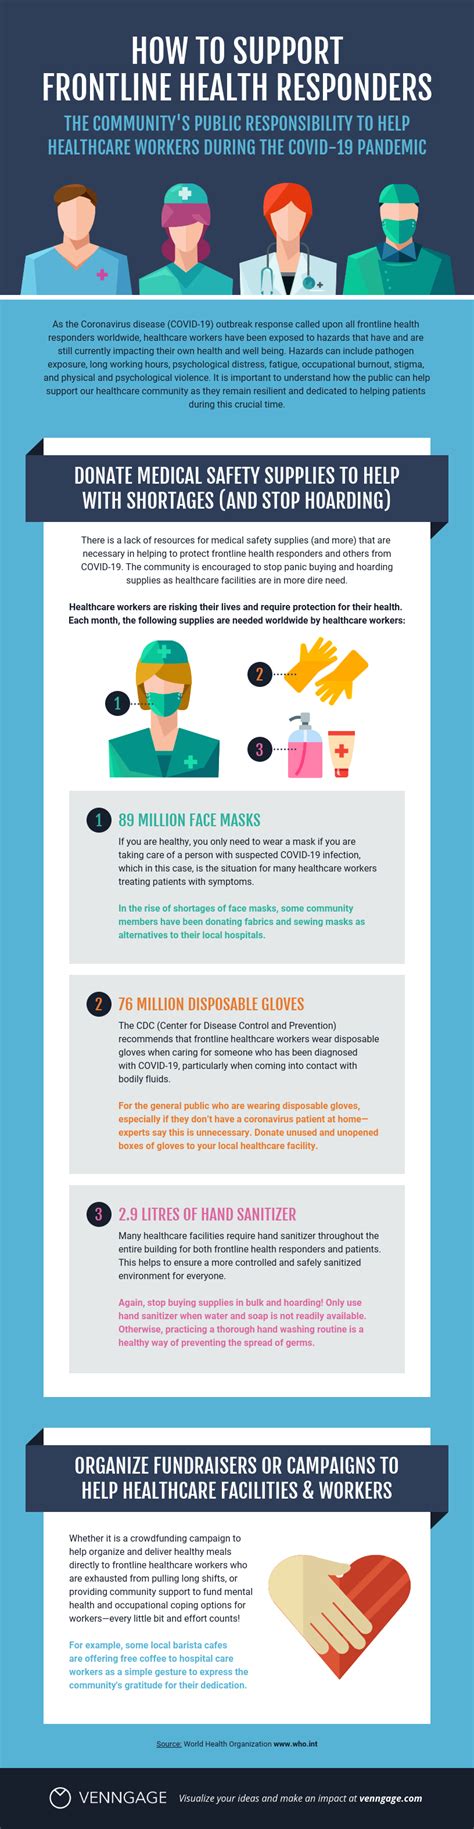 Infographic Images Healthcare Professionals